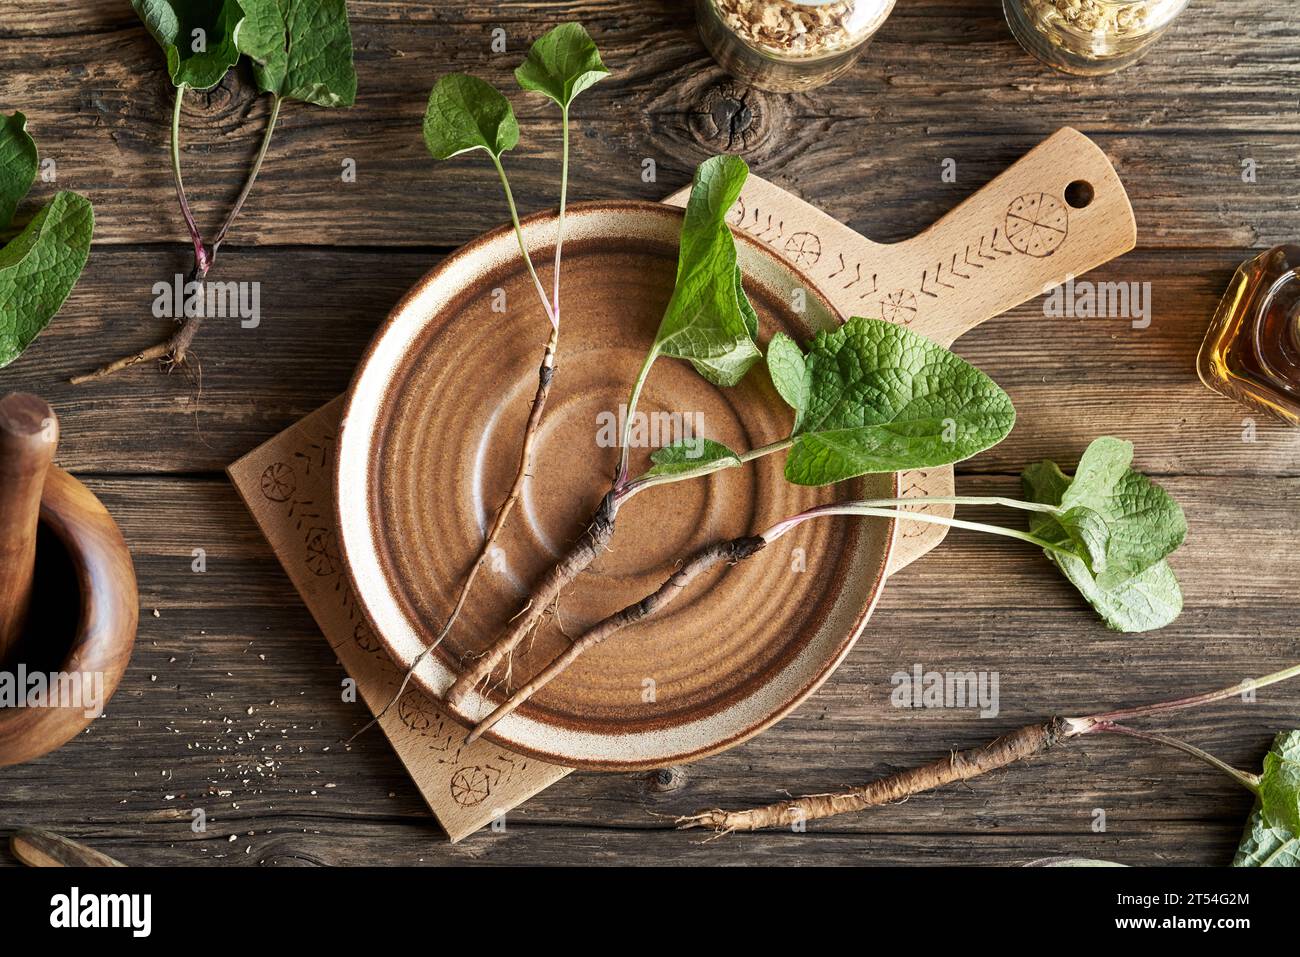 Whole young burdock plants with roots on a rustic table, top view Stock Photo